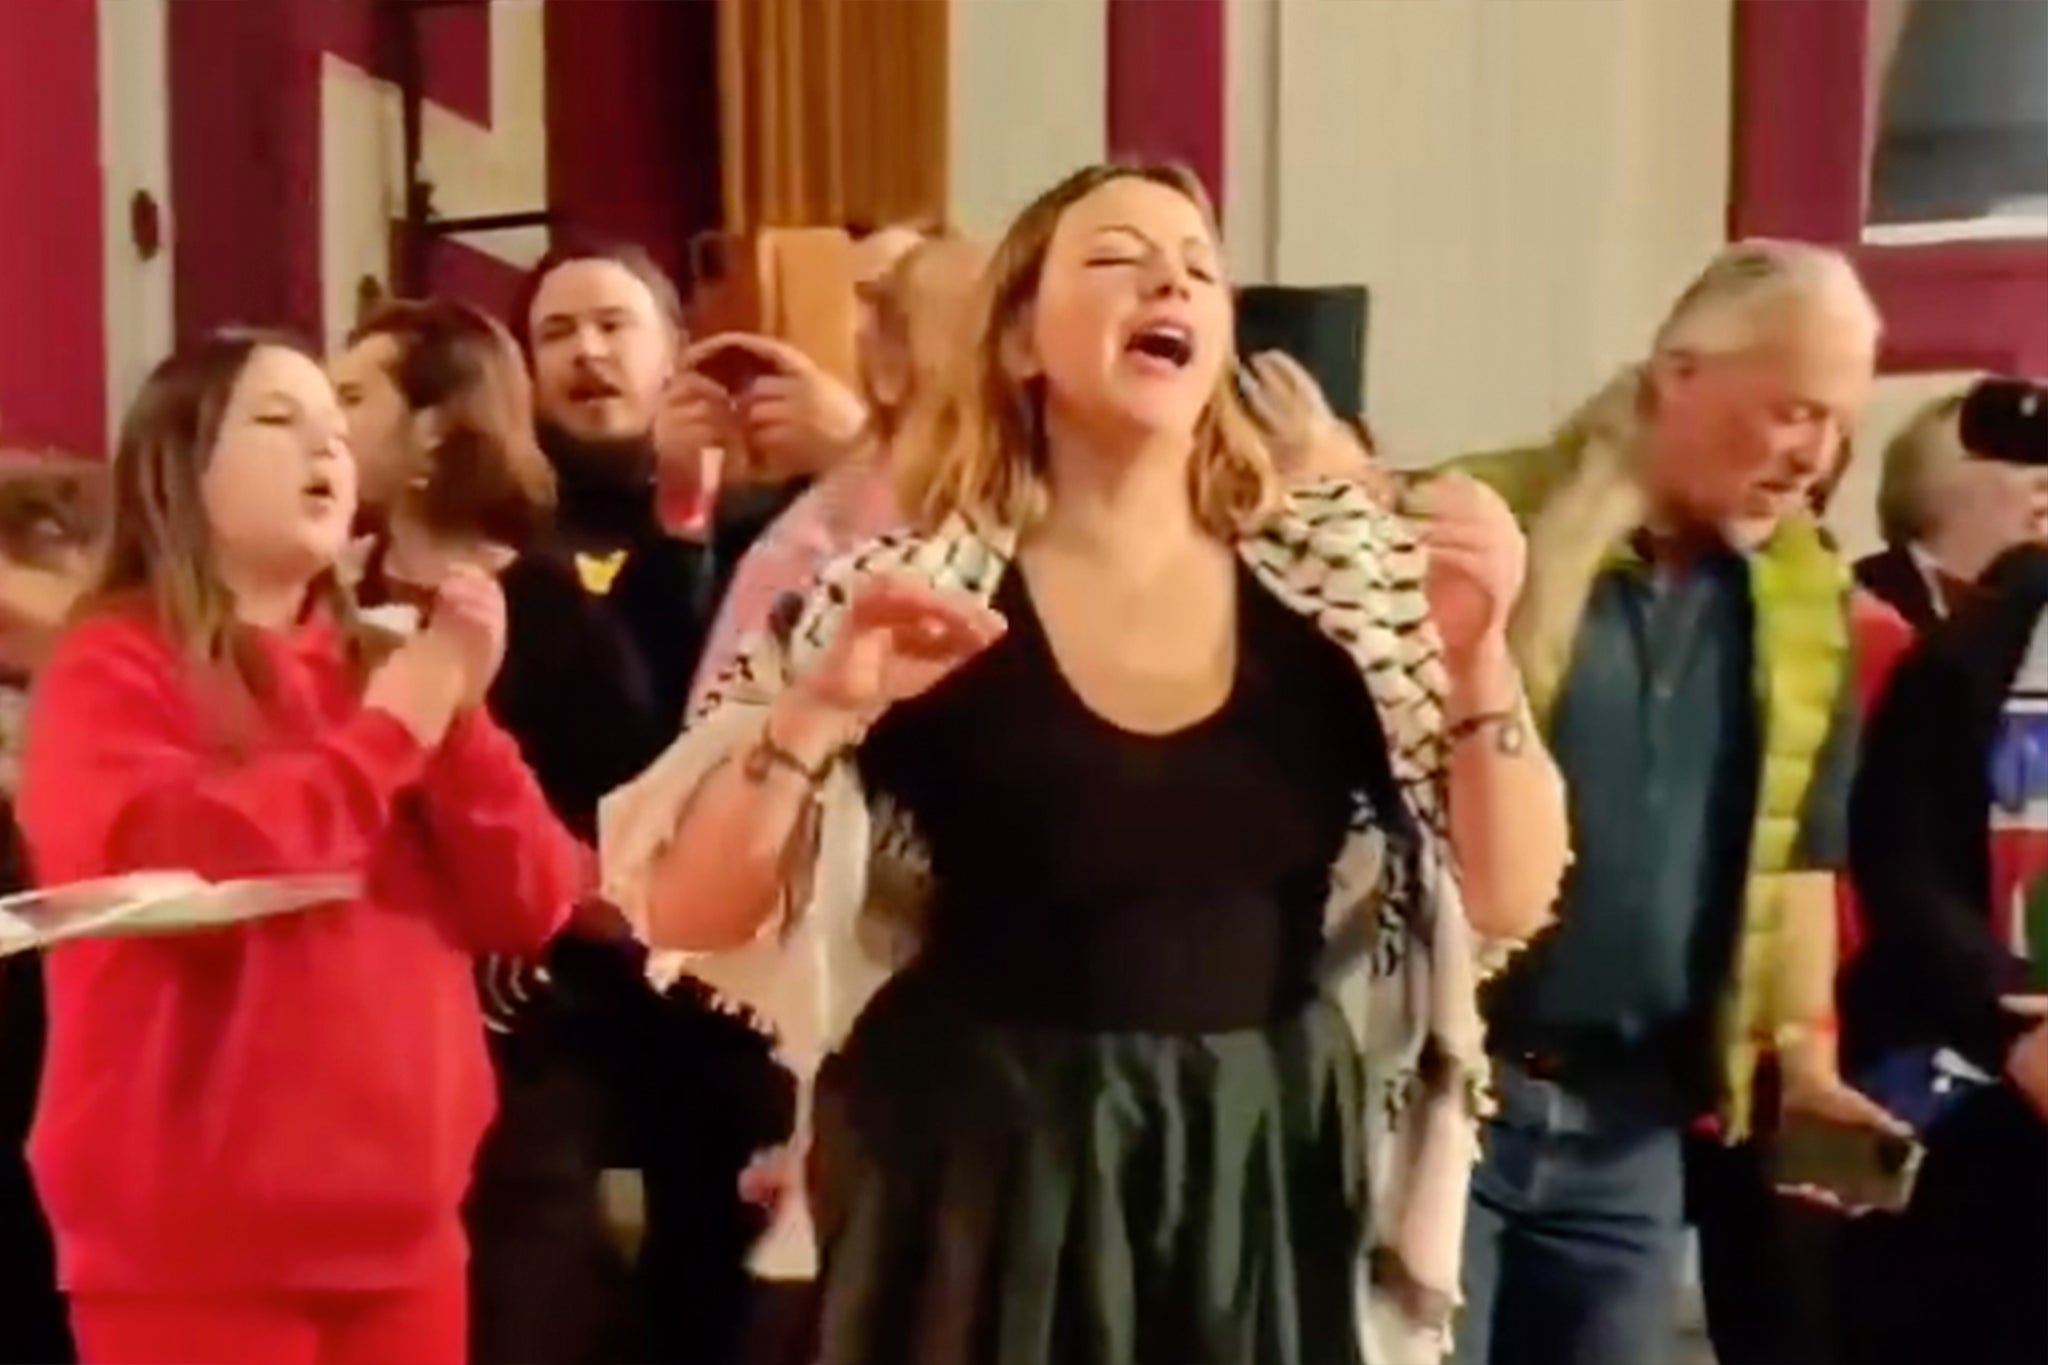 charlotte church criticised for singing ‘antisemitic’ song ‘river to the sea’ during pro-palestine concert